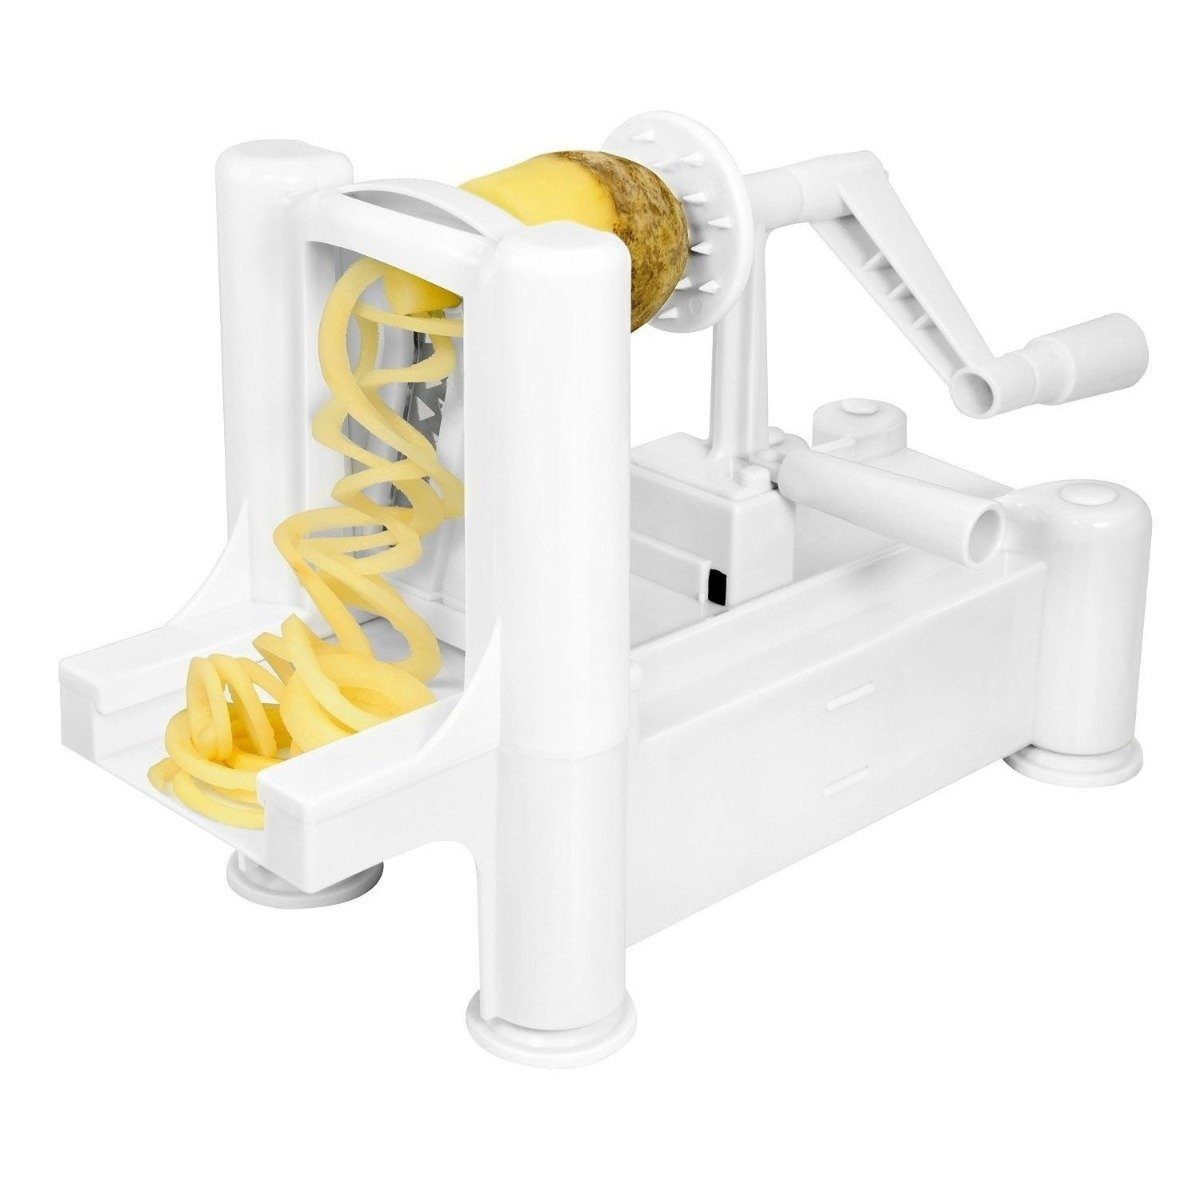 Big Boss Slice-A-Roo Ultimate Tri-blade Vegetable and Fruit Peeler Spiralizer / White